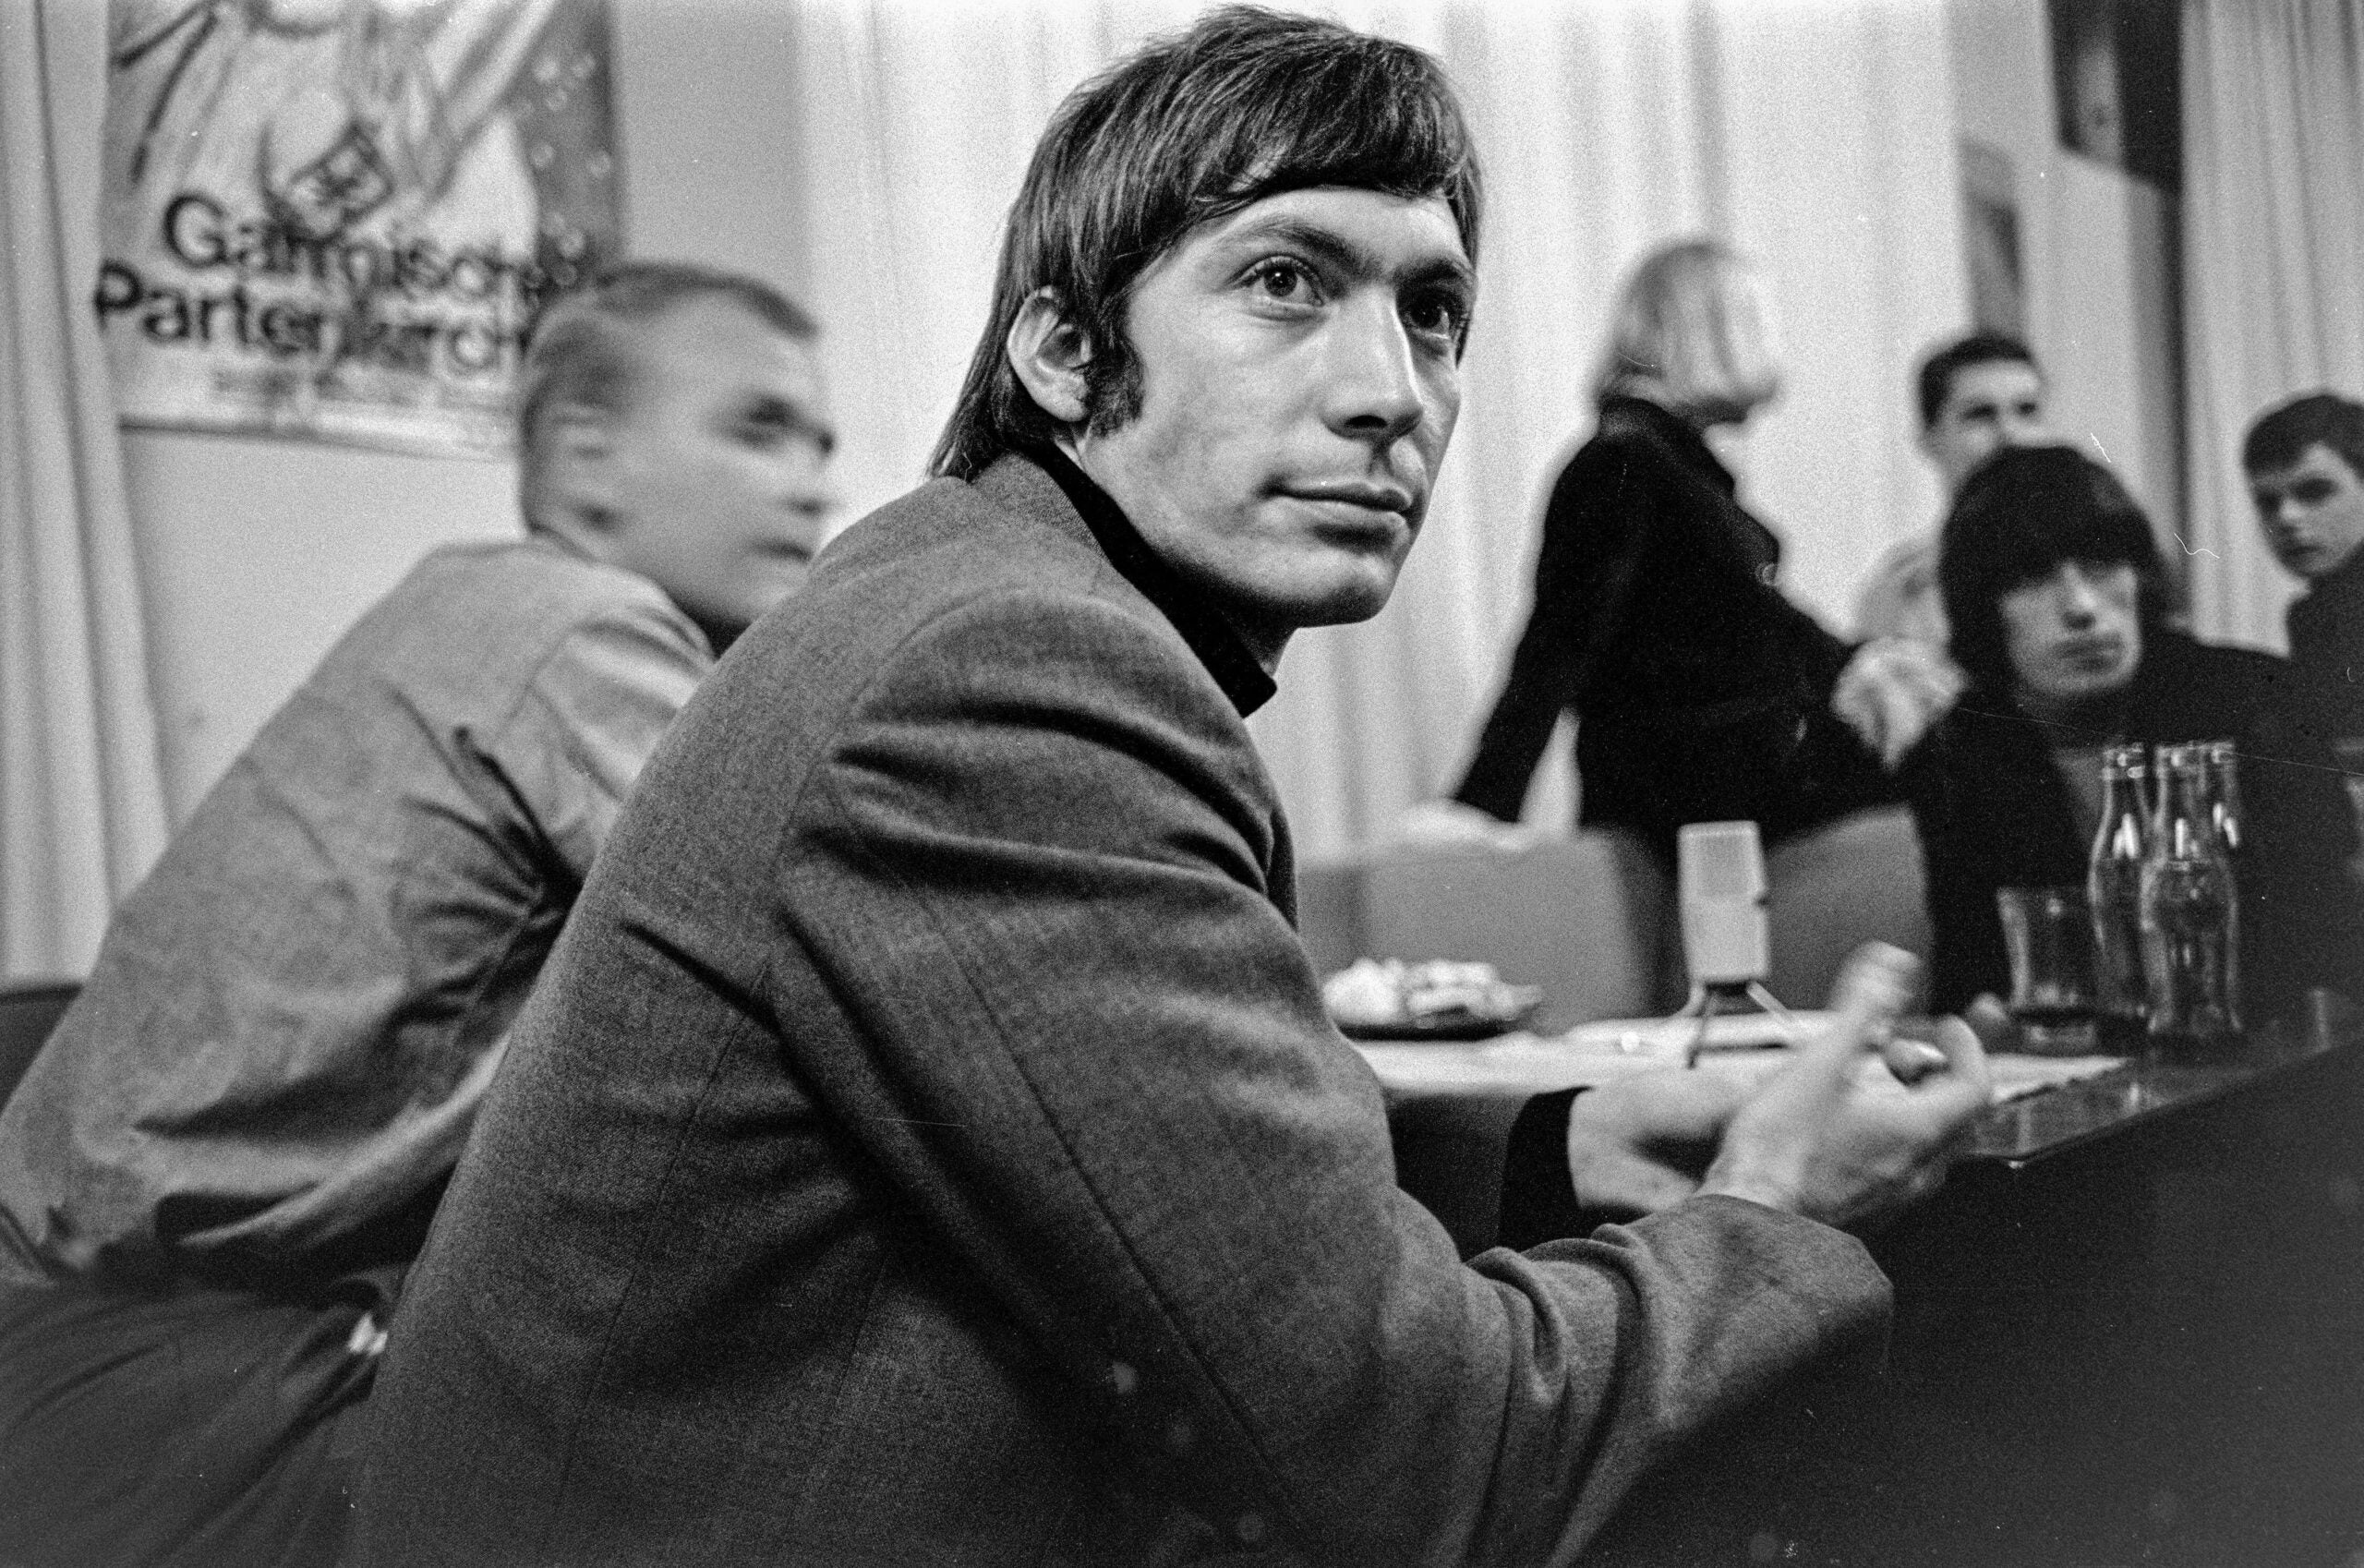 Charlie Watts was the quietest, and coolest, of the Rolling Stones